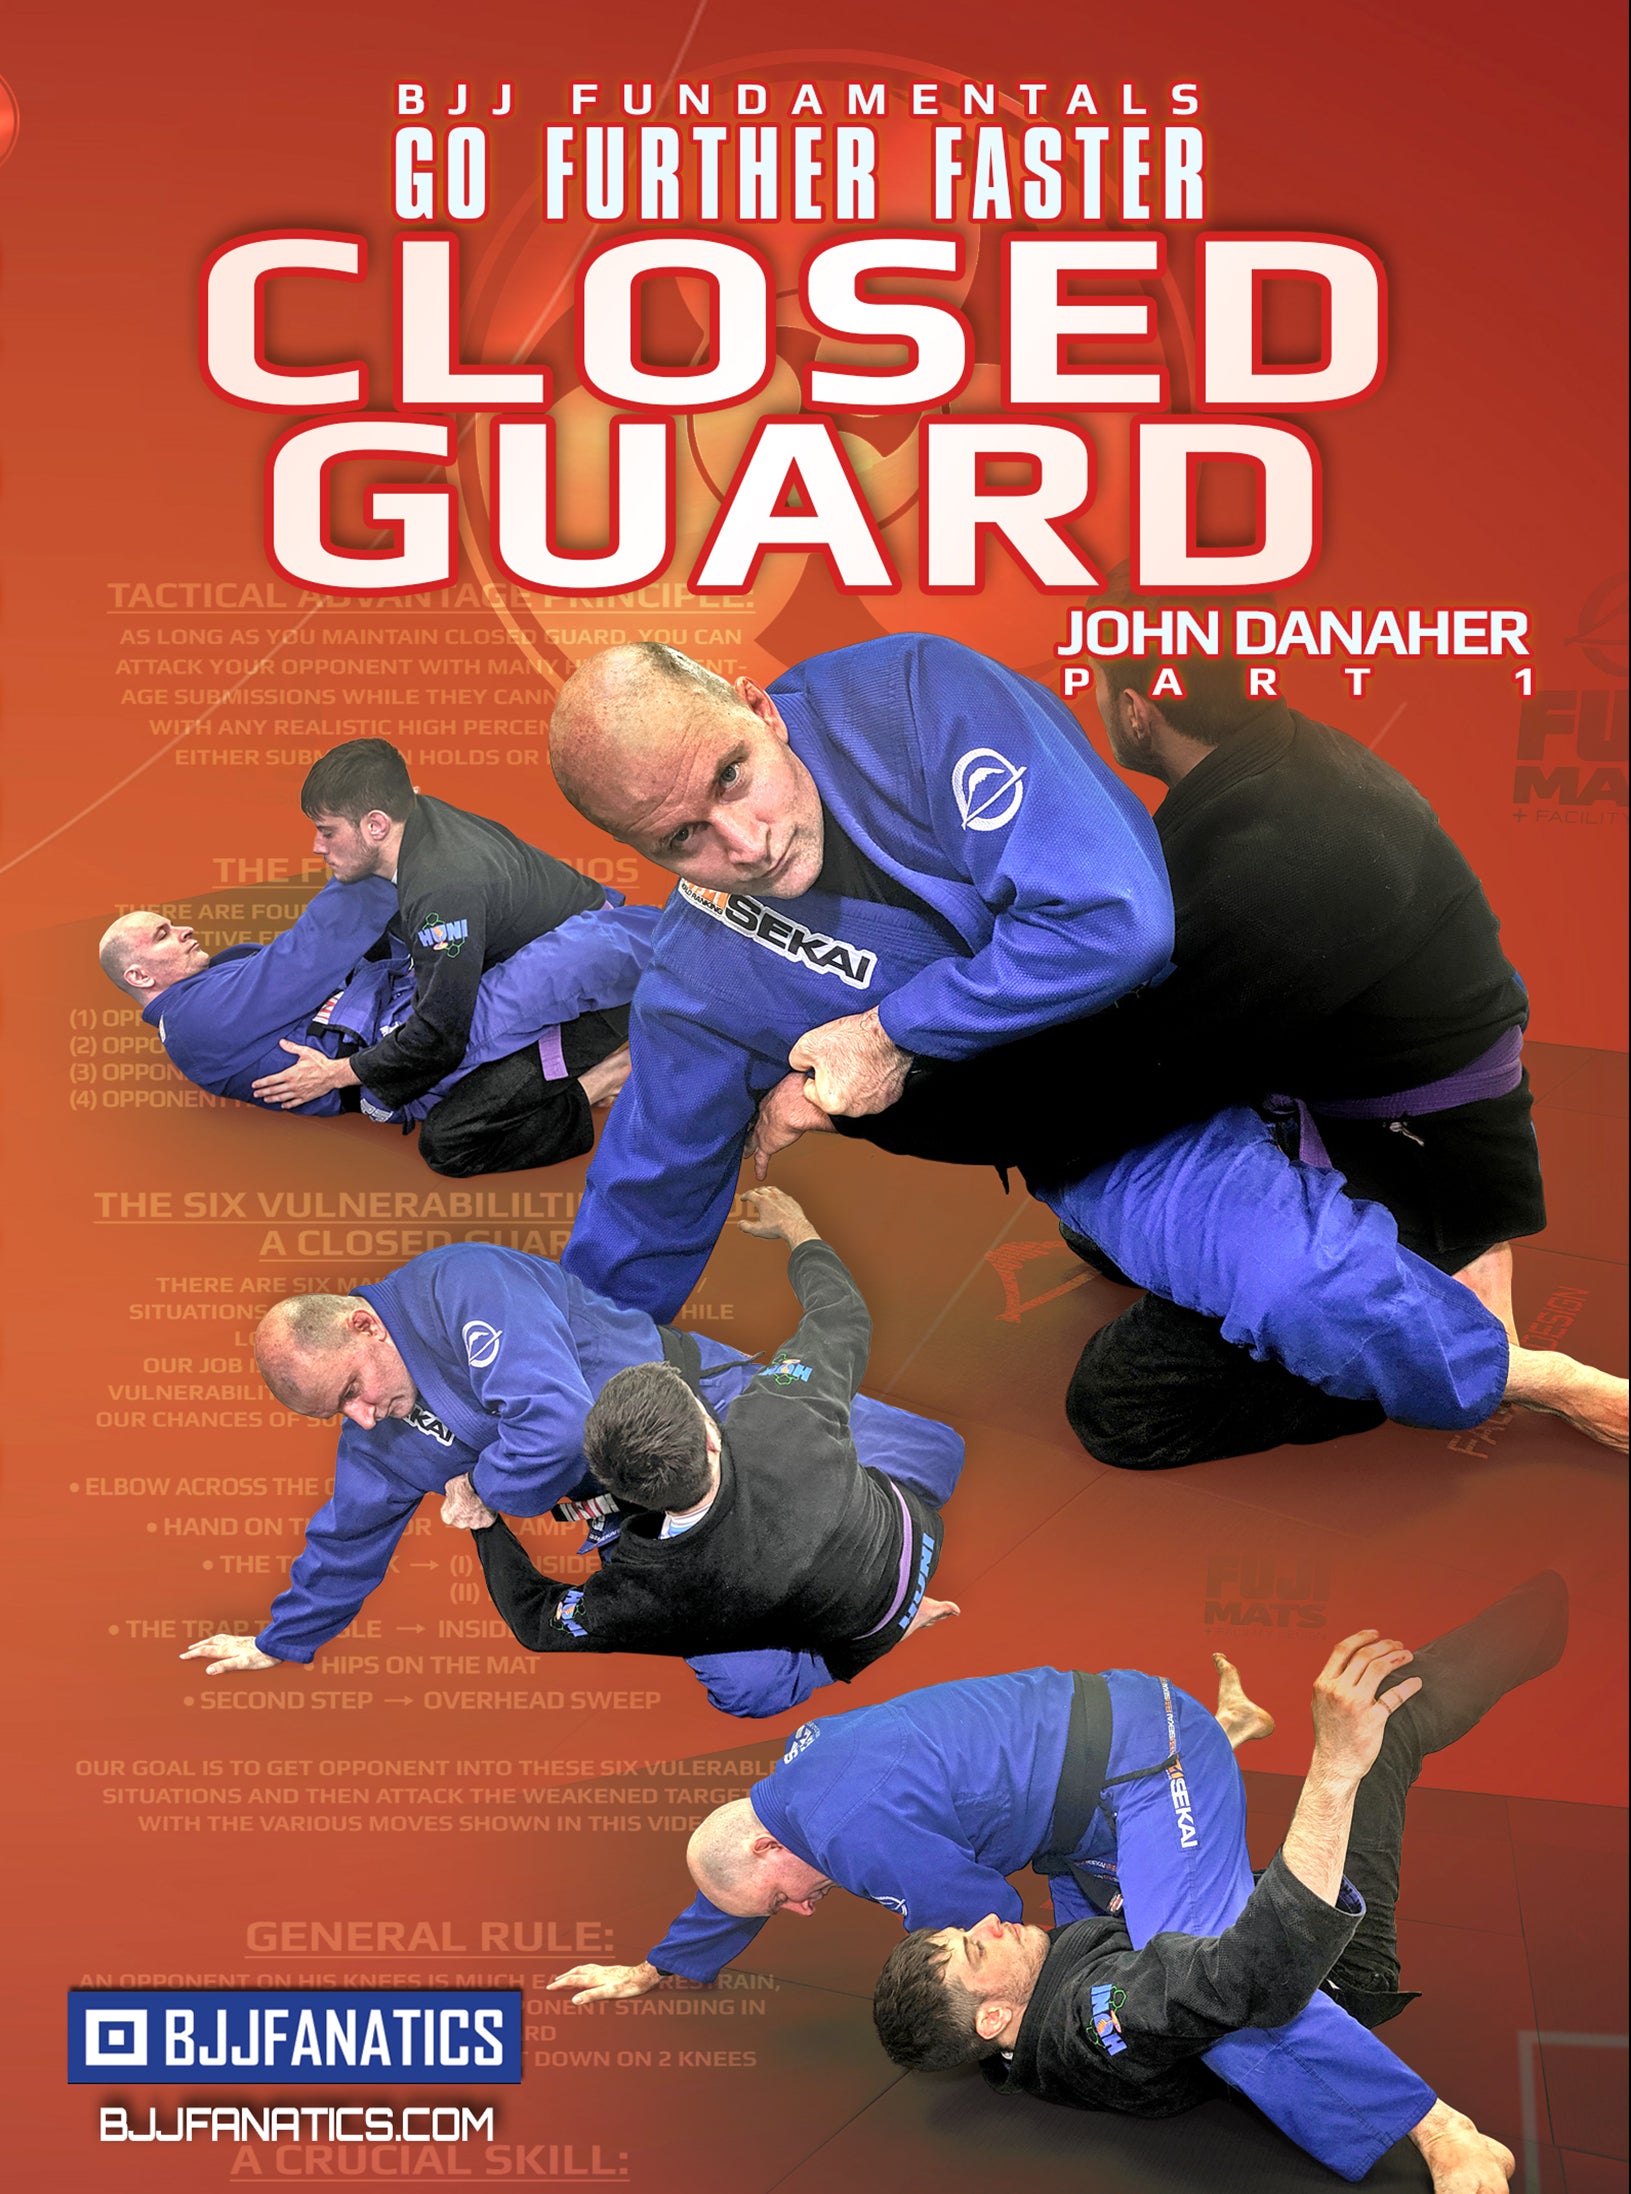 Closed Guard: BJJ Fundamentals - Go Further Faster by John Danaher